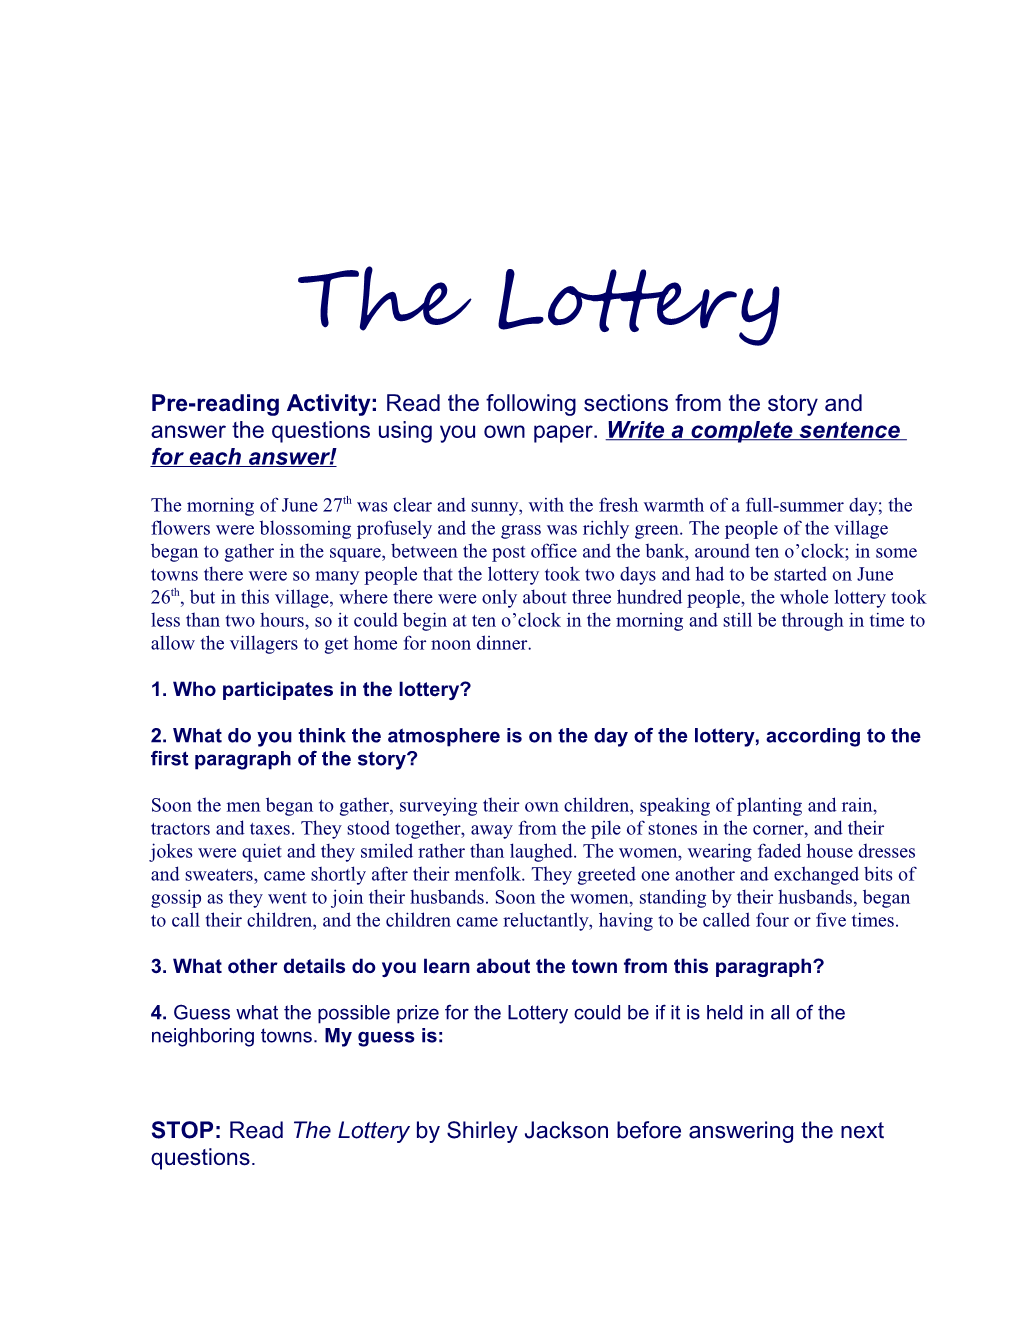 1. Who Participates in the Lottery?